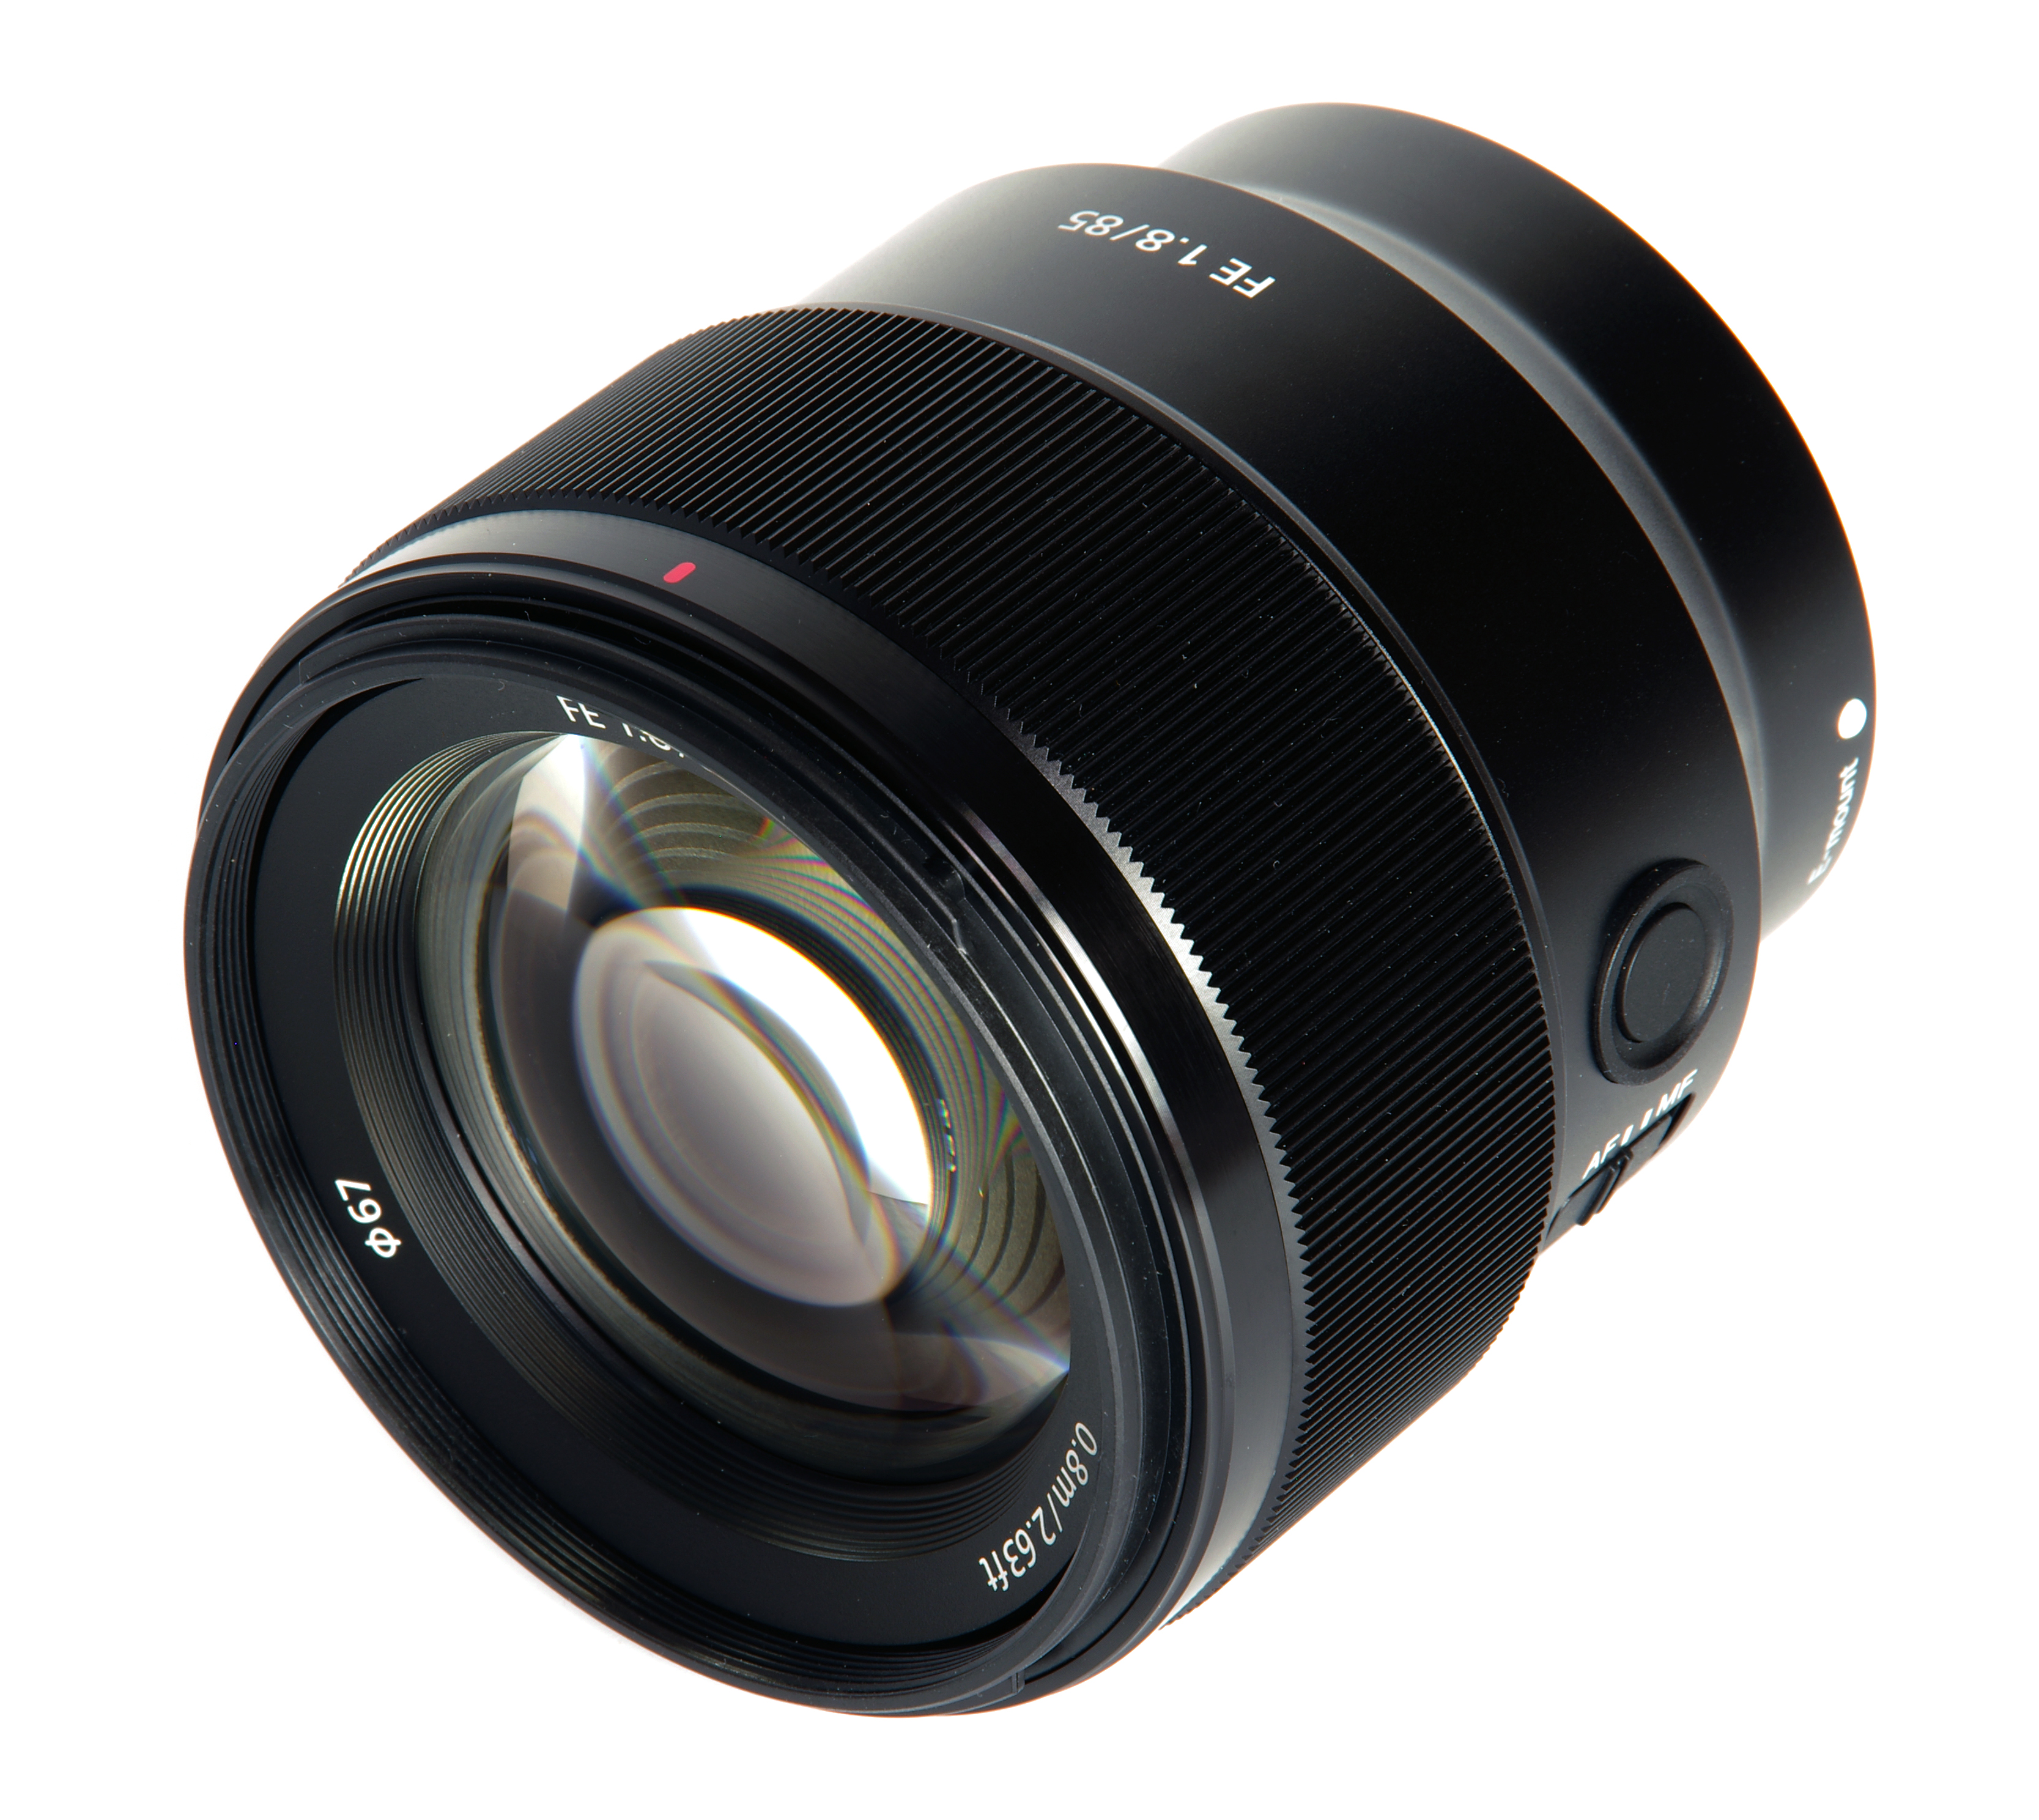 Sony FE 85mm f/1.8 Review